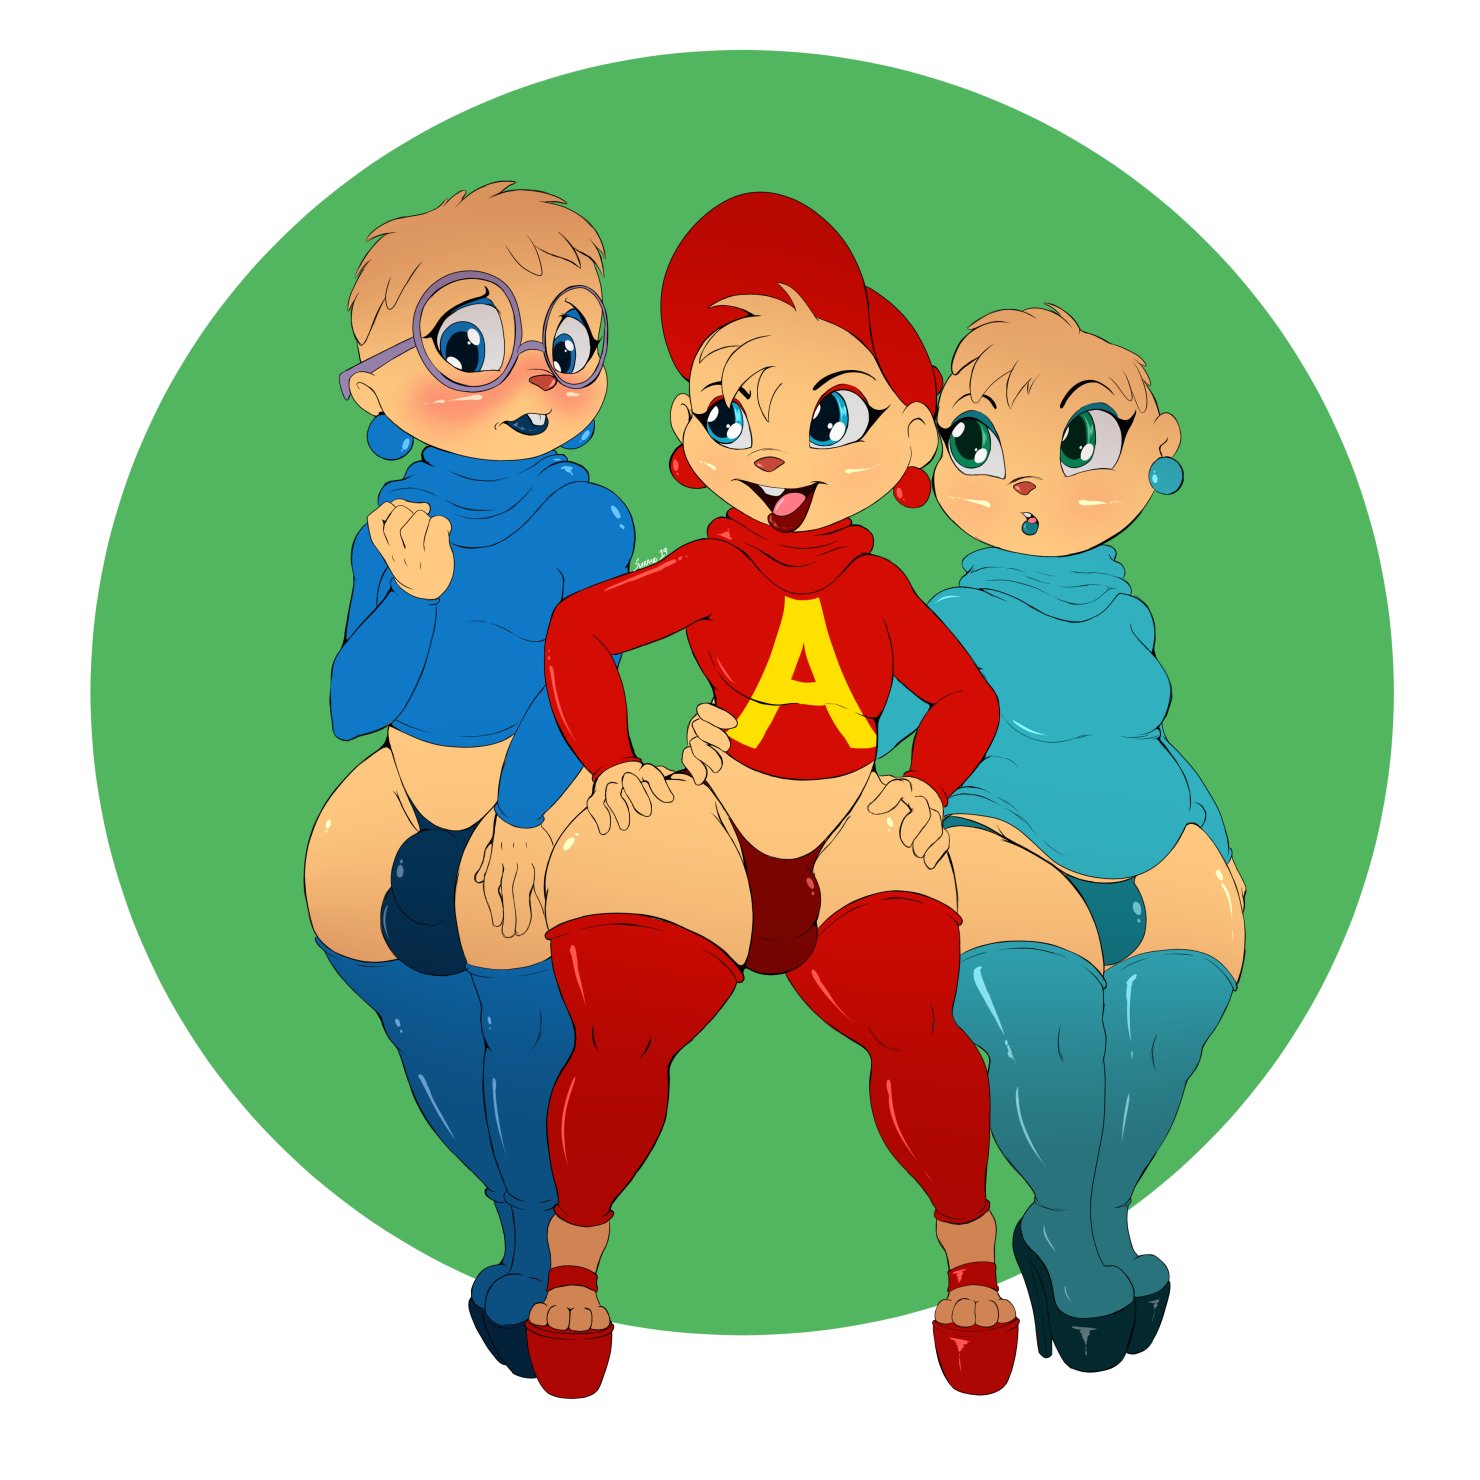 “Alvin and the Chipmunks join my What's a Childhood series.” 